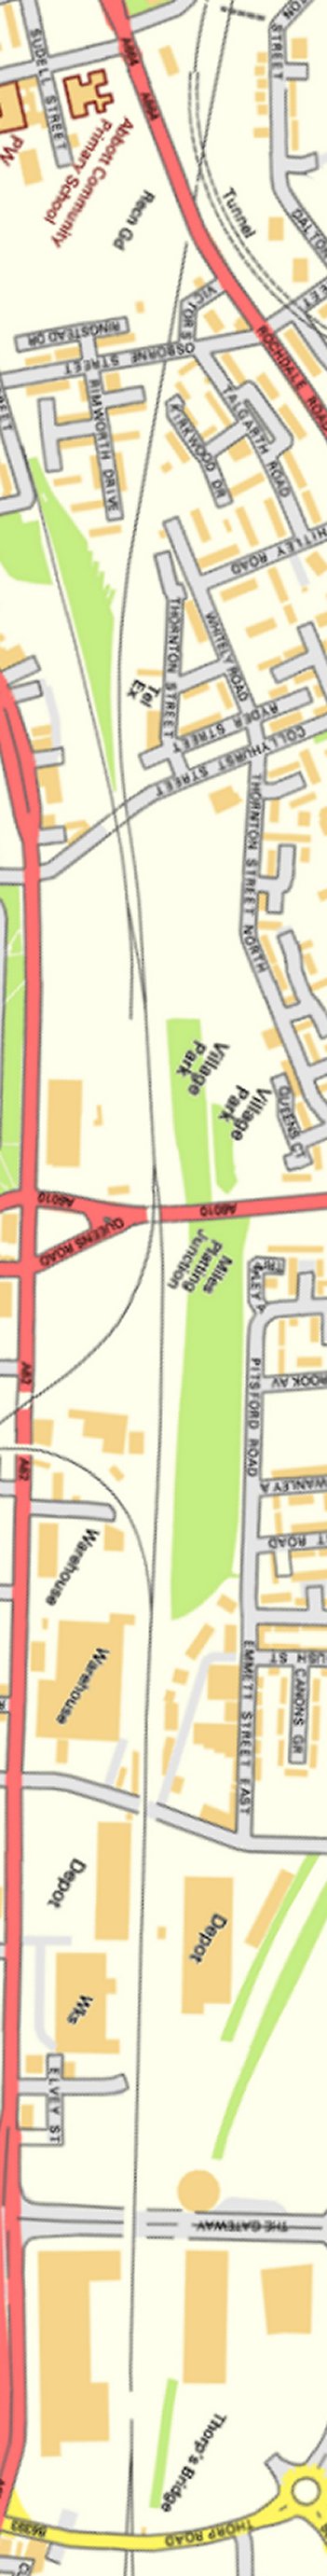 Section from Ordnance Survey OpenSource mapping 2013 showing L&YR railway line from Bromley Street Manchester - Newton Heath